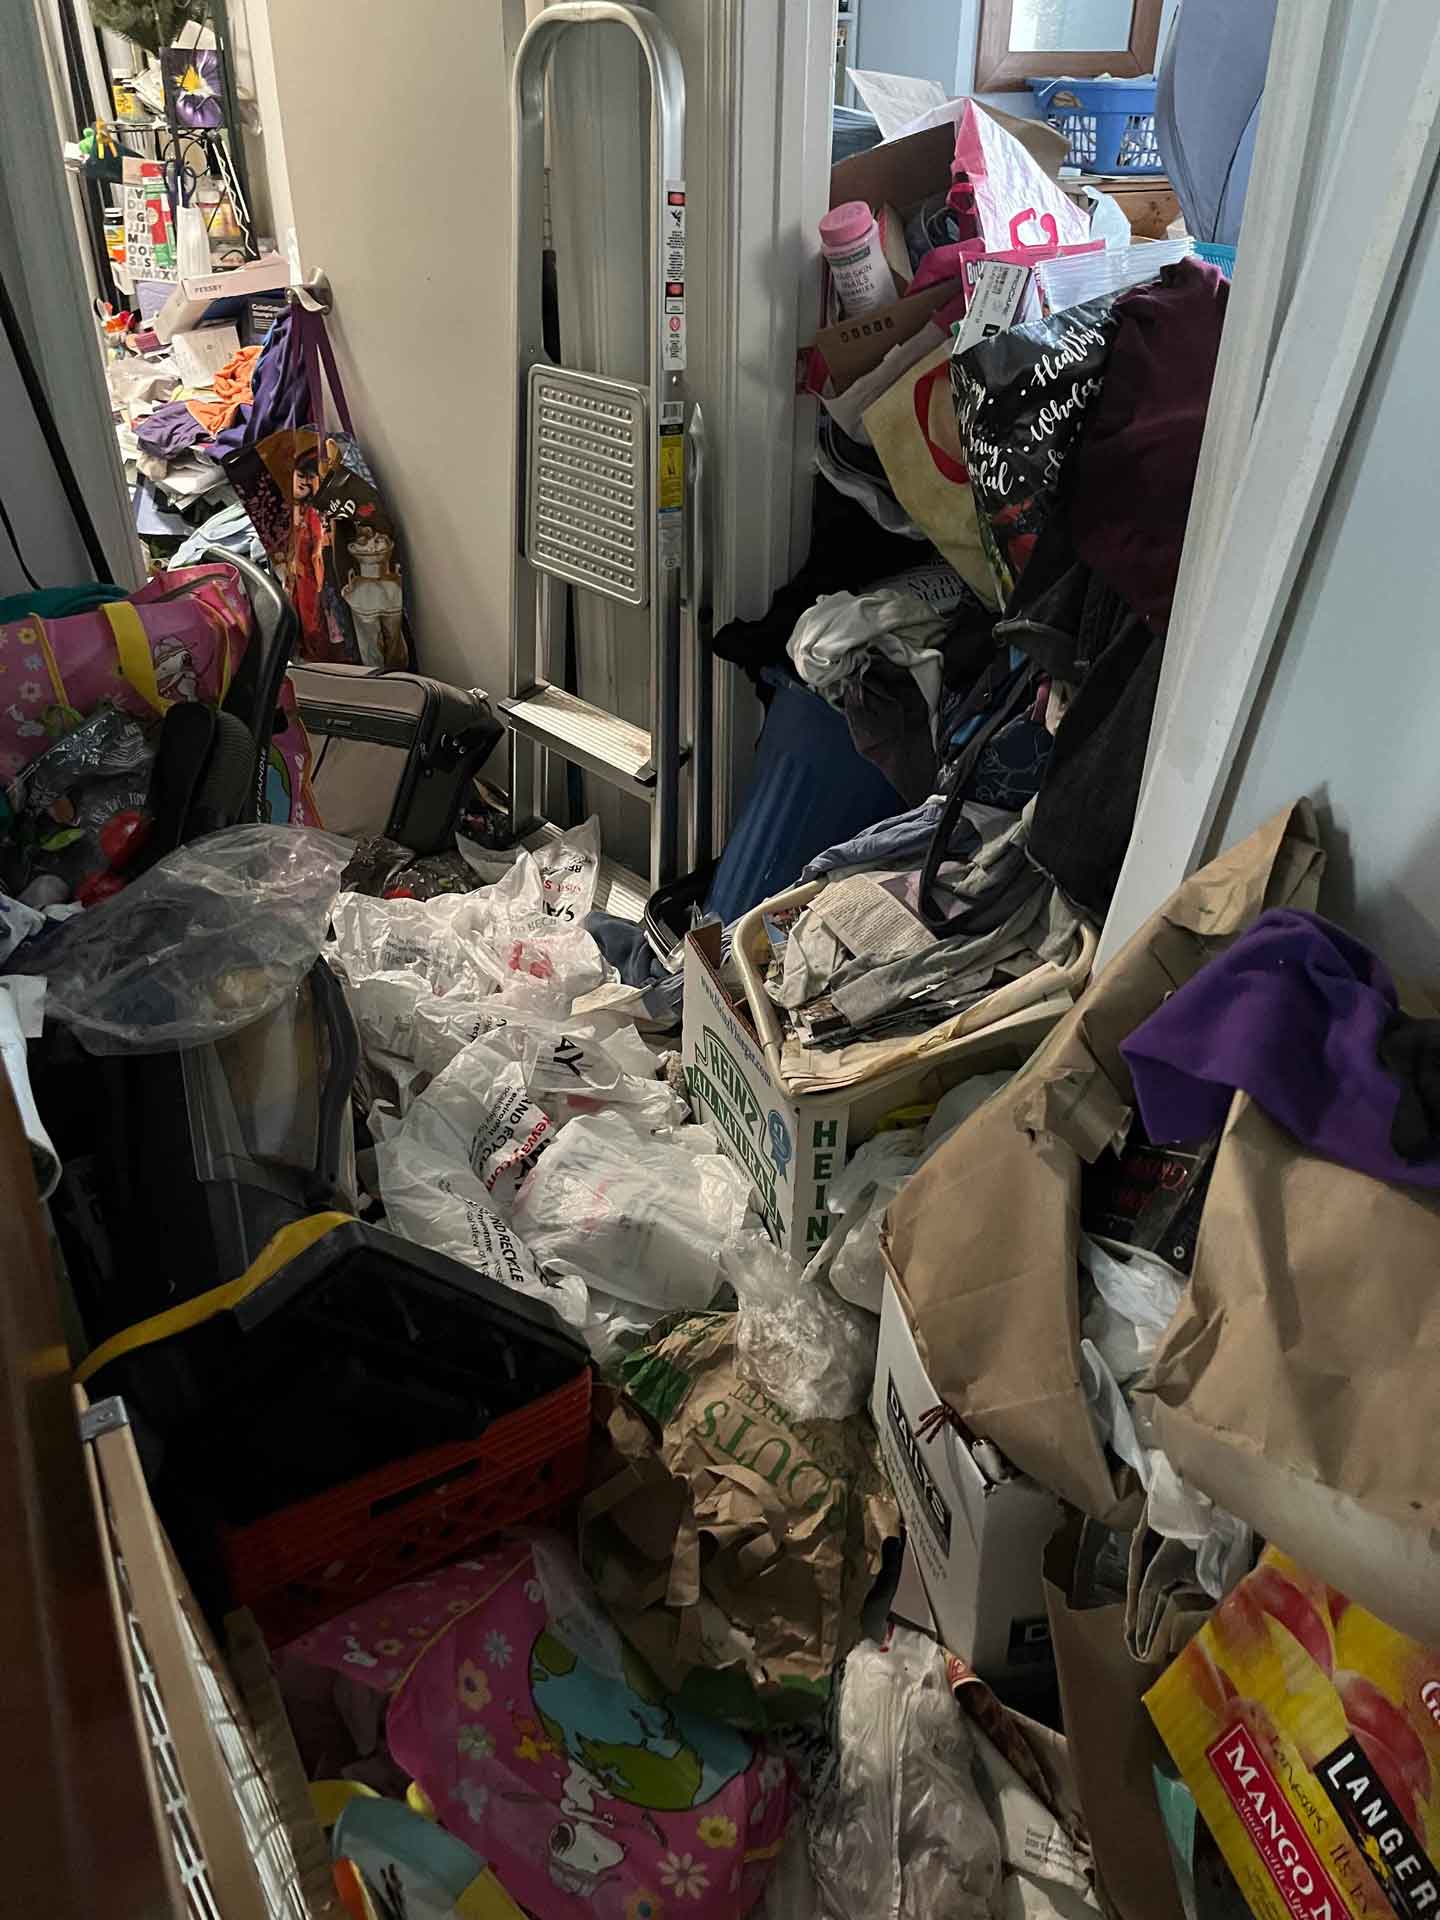 Piles of junk in hoarder's house